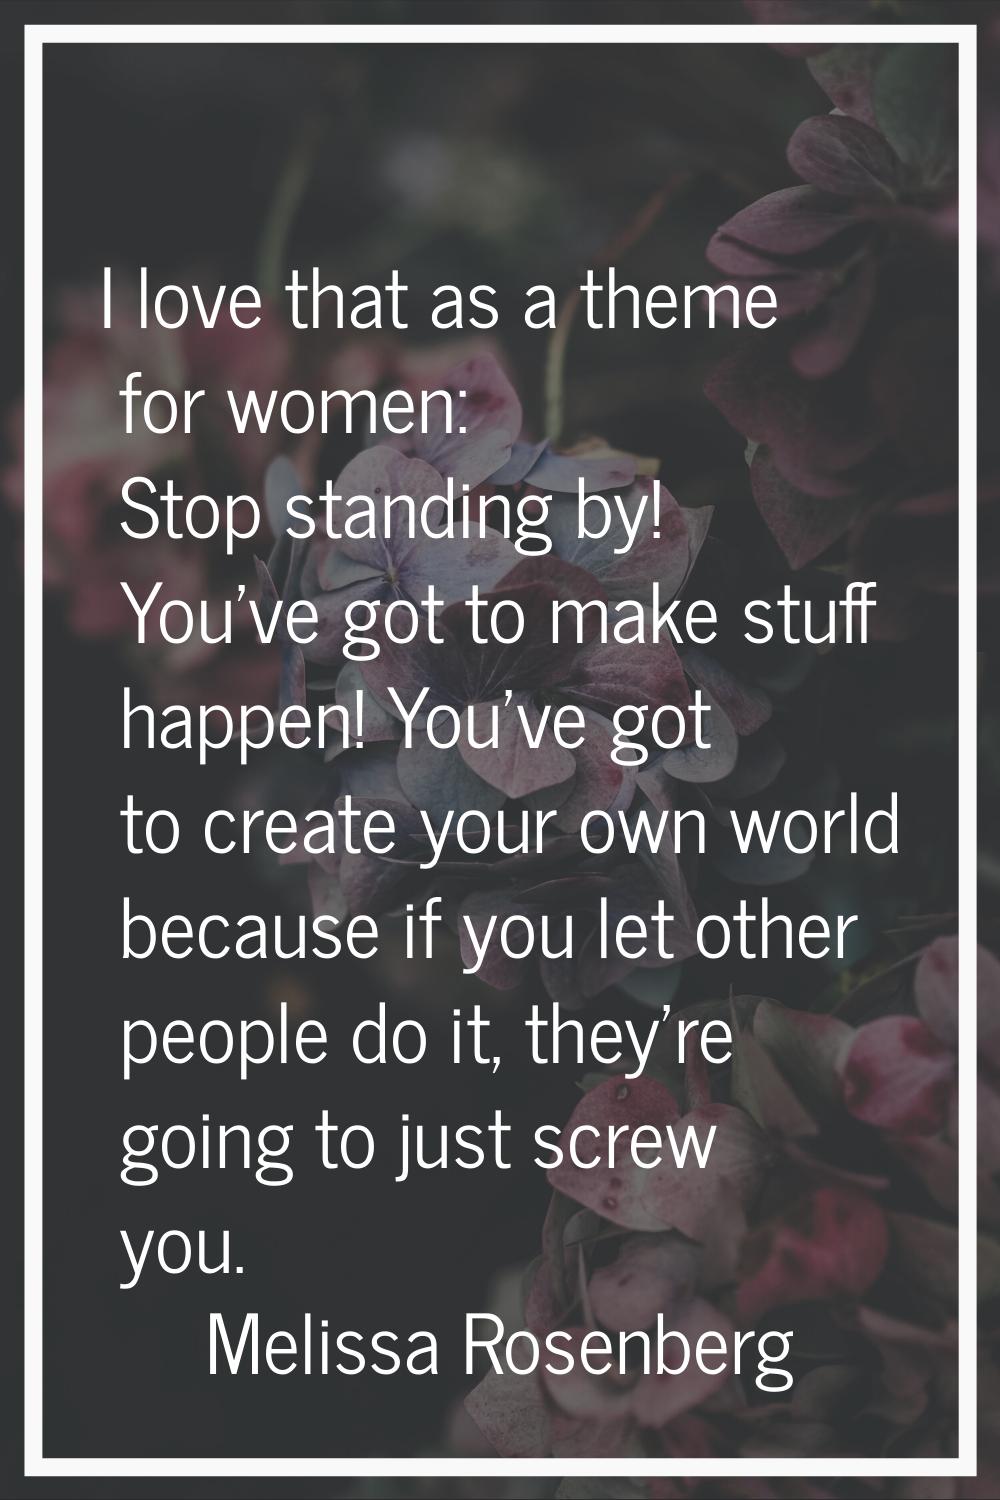 I love that as a theme for women: Stop standing by! You've got to make stuff happen! You've got to 